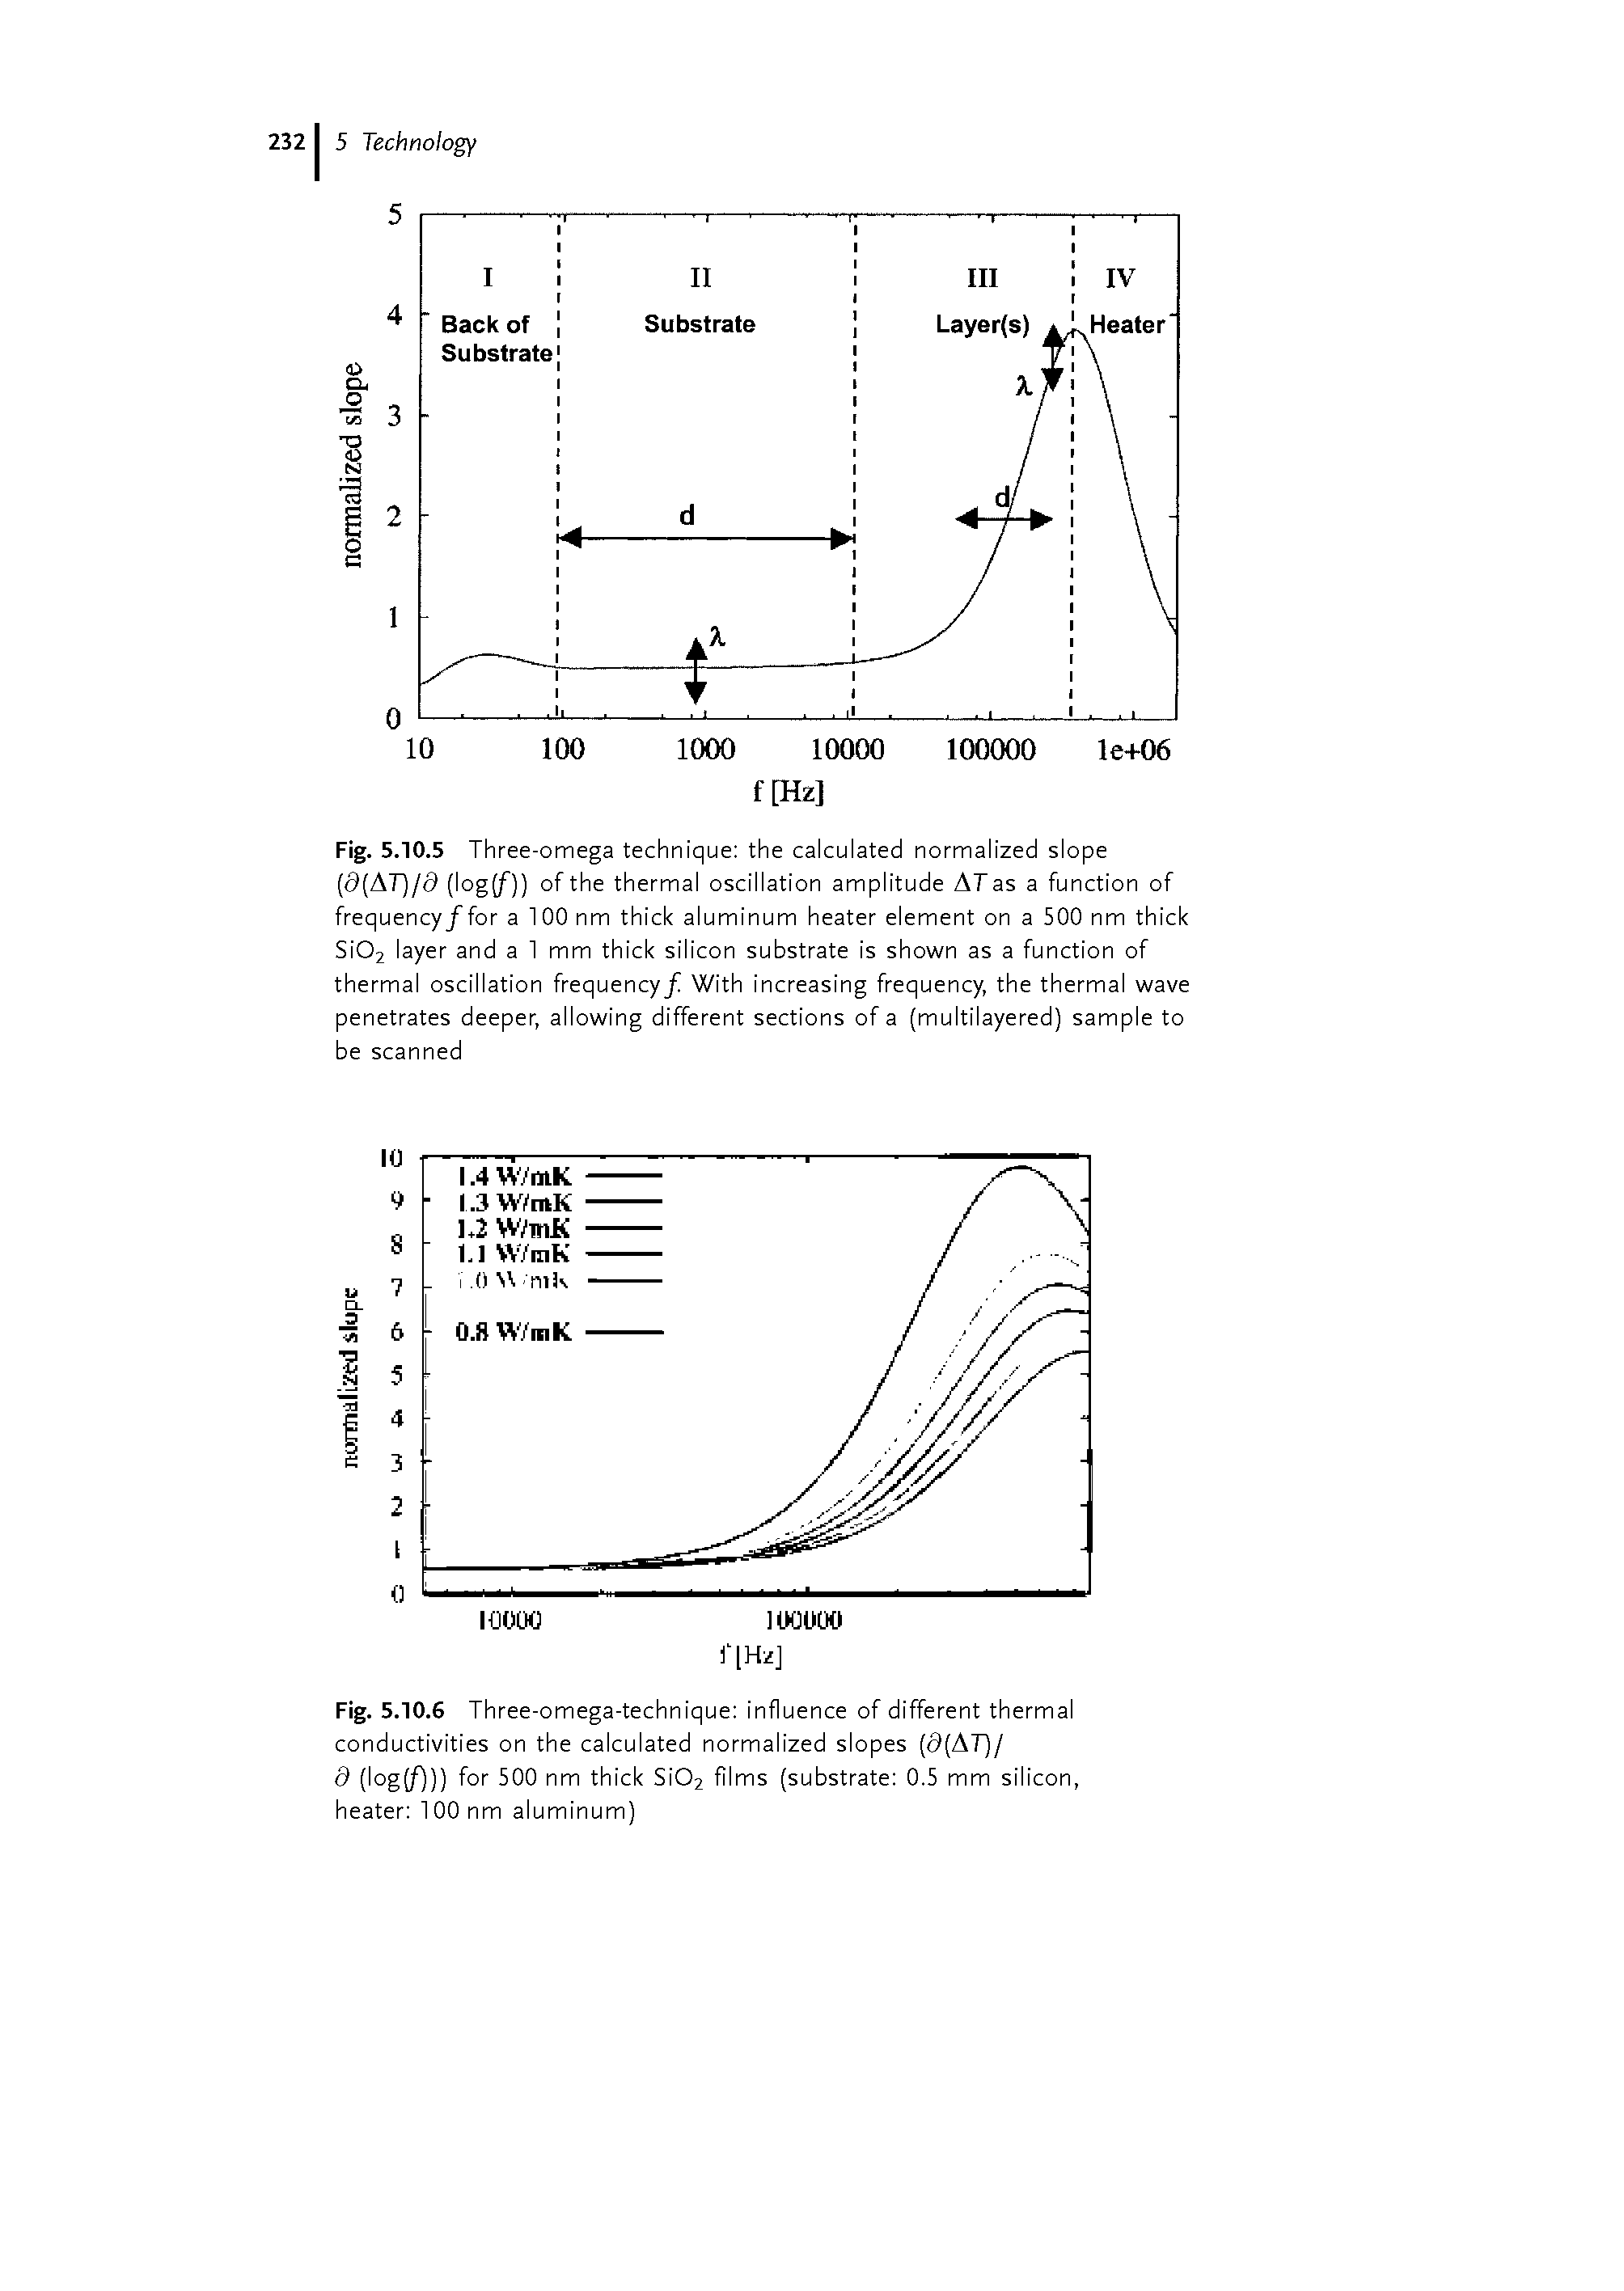 Fig. 5.10.5 Three-omega technique the calculated normalized slope (d(AT)/d (log /)) of the thermal oscillation amplitude AT as a function of frequency/for a 100 nm thick aluminum heater element on a 500 nm thick Si02 layer and a 1 mm thick silicon substrate is shown as a function of thermal oscillation frequency/ With increasing frequency, the thermal wave penetrates deeper, allowing different sections of a (multilayered) sample to be scanned...